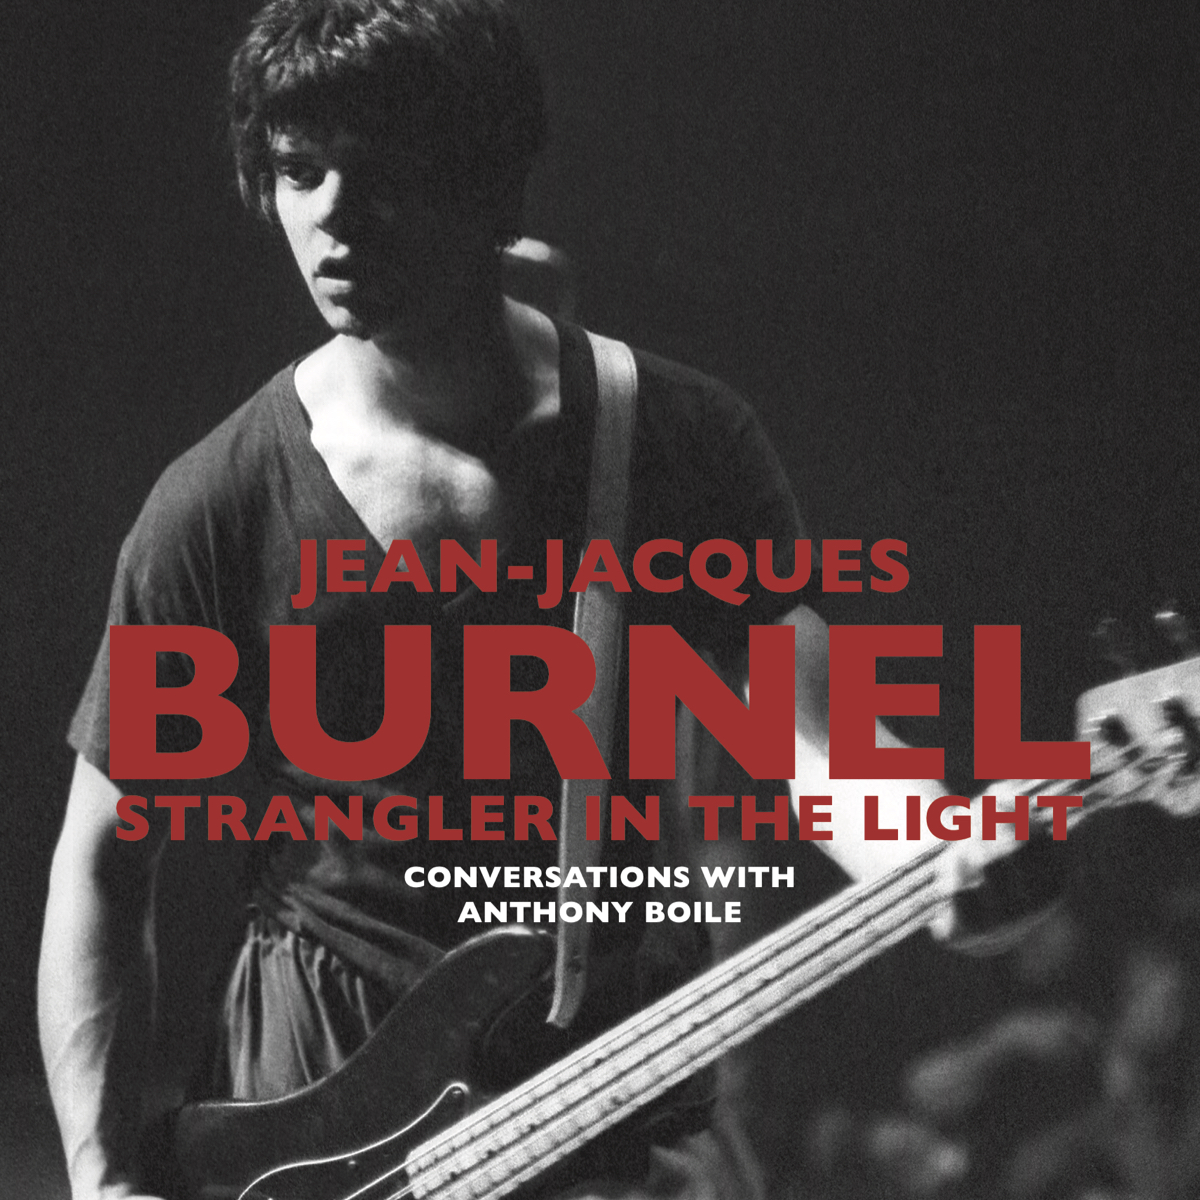 ❗We can finally announce due to popular demand, the official english translation of JJ Burnel's autobiography 'Strangler In The Light', edited by JJ himself, will be released on 13th October 2023❗ 👉 Pre-order the first edition hardback (english) here: stranglers.tmstor.es